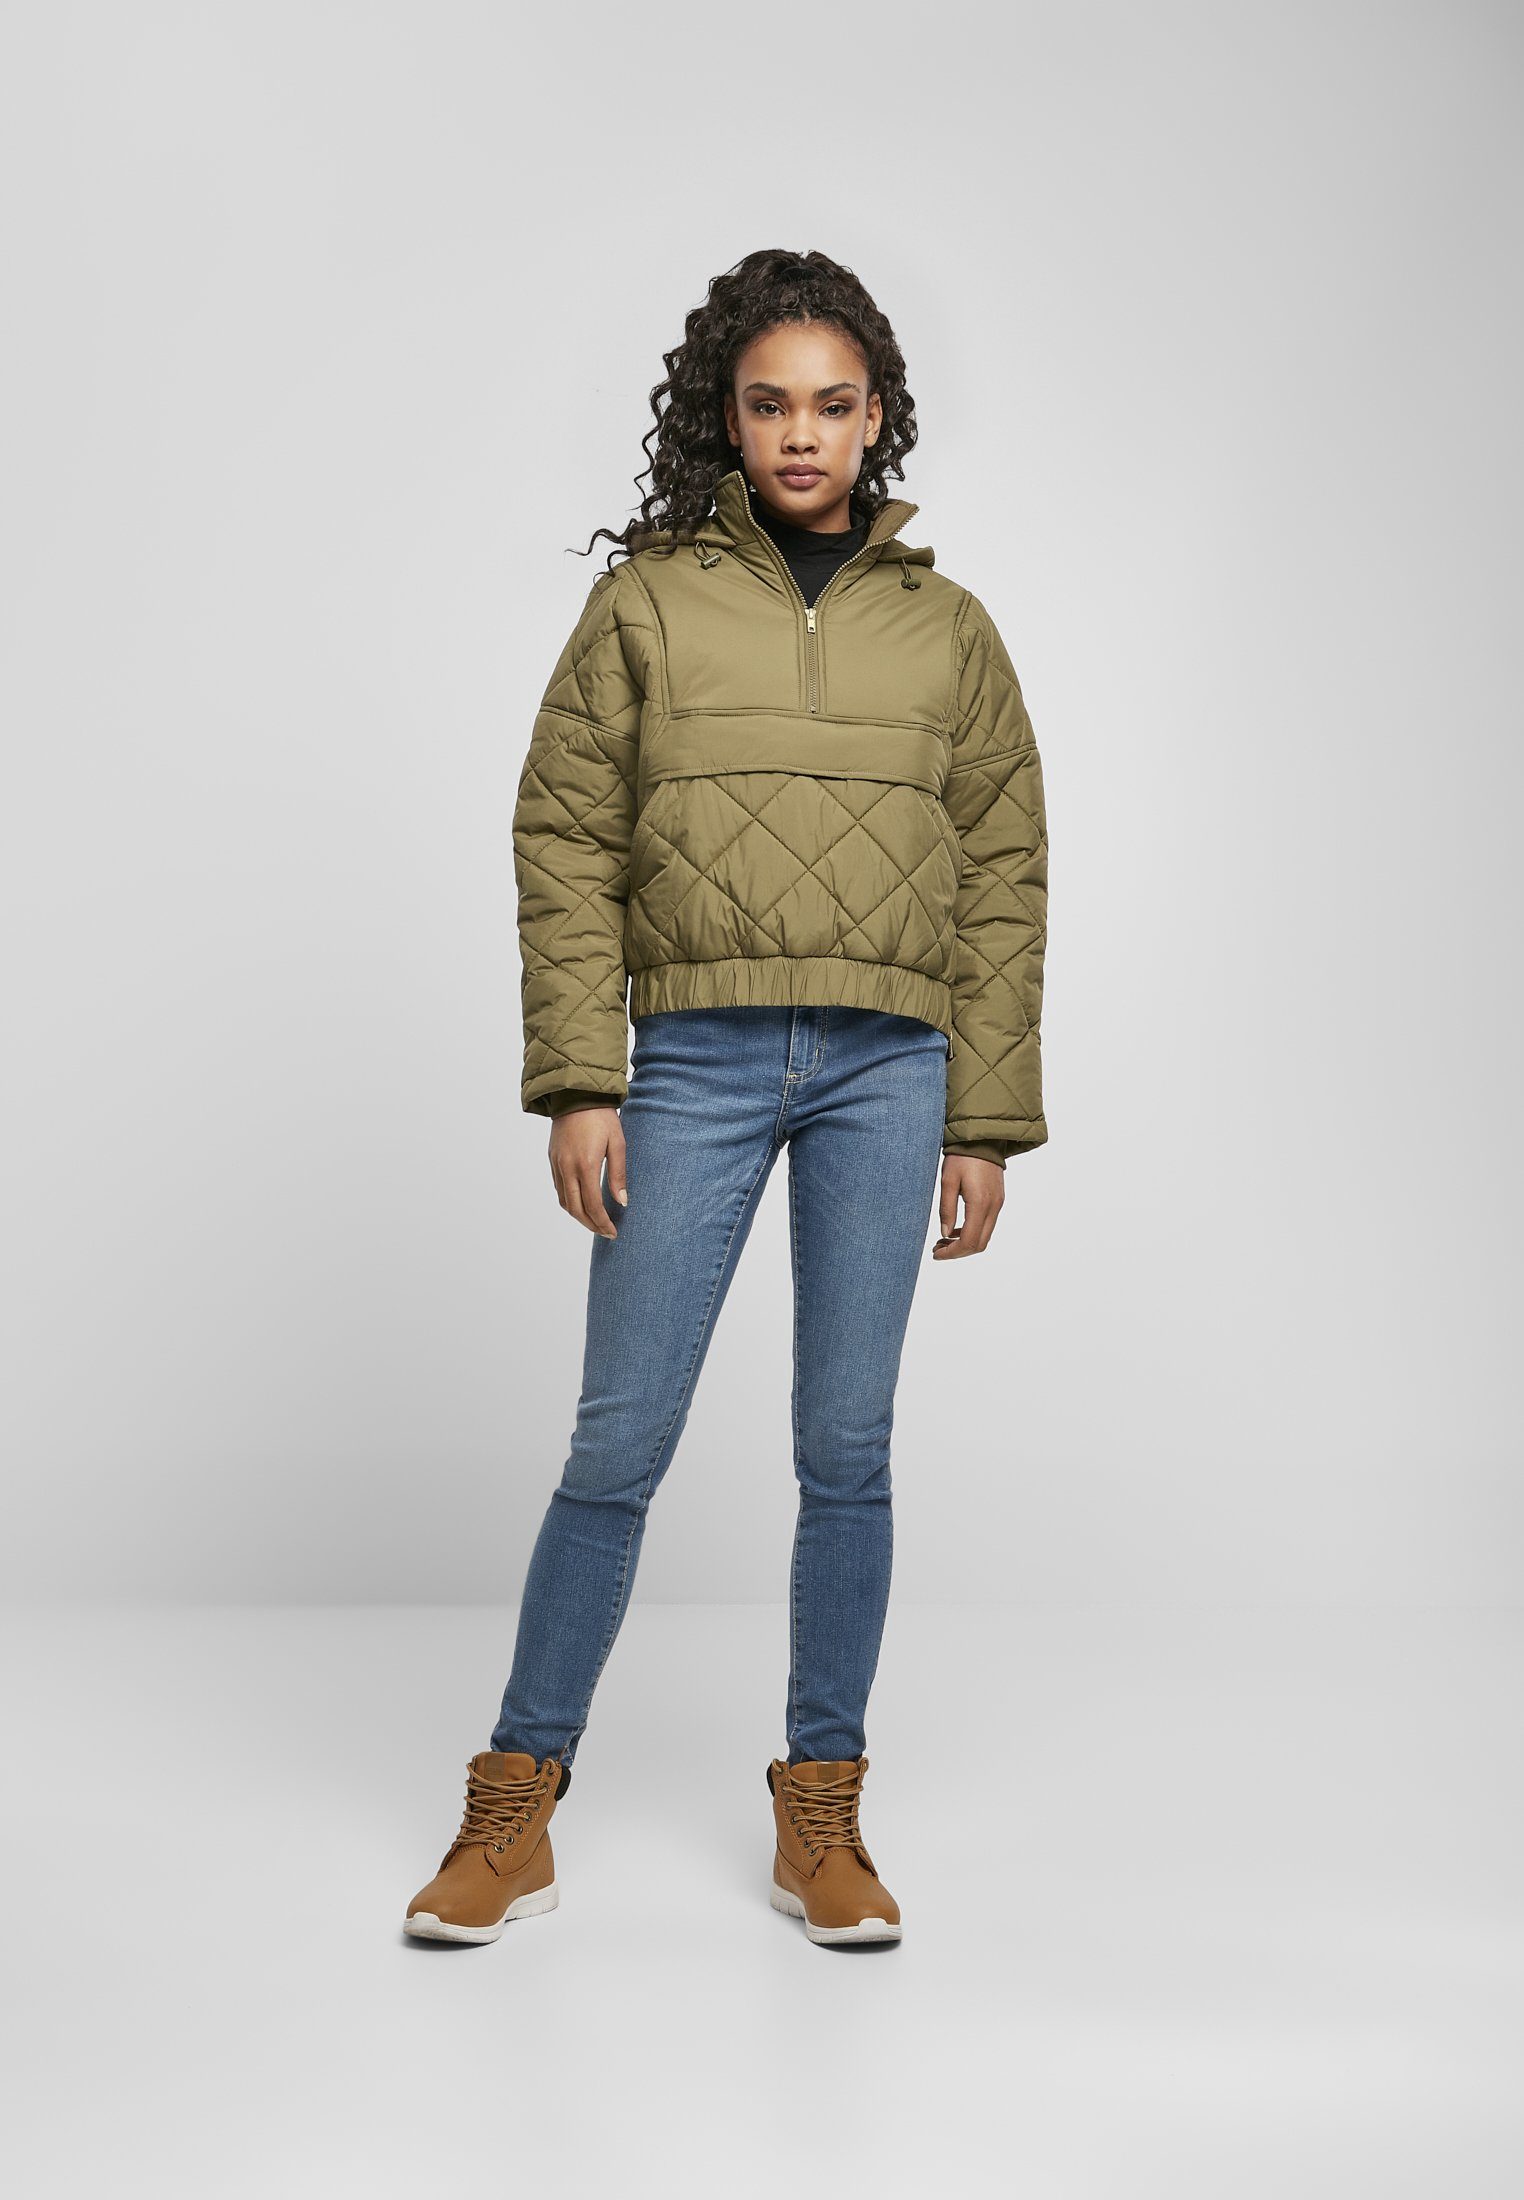 Winterjacke Ladies Jacket Pull Damen Quilted tiniolive Over URBAN Oversized (1-St) CLASSICS Diamond